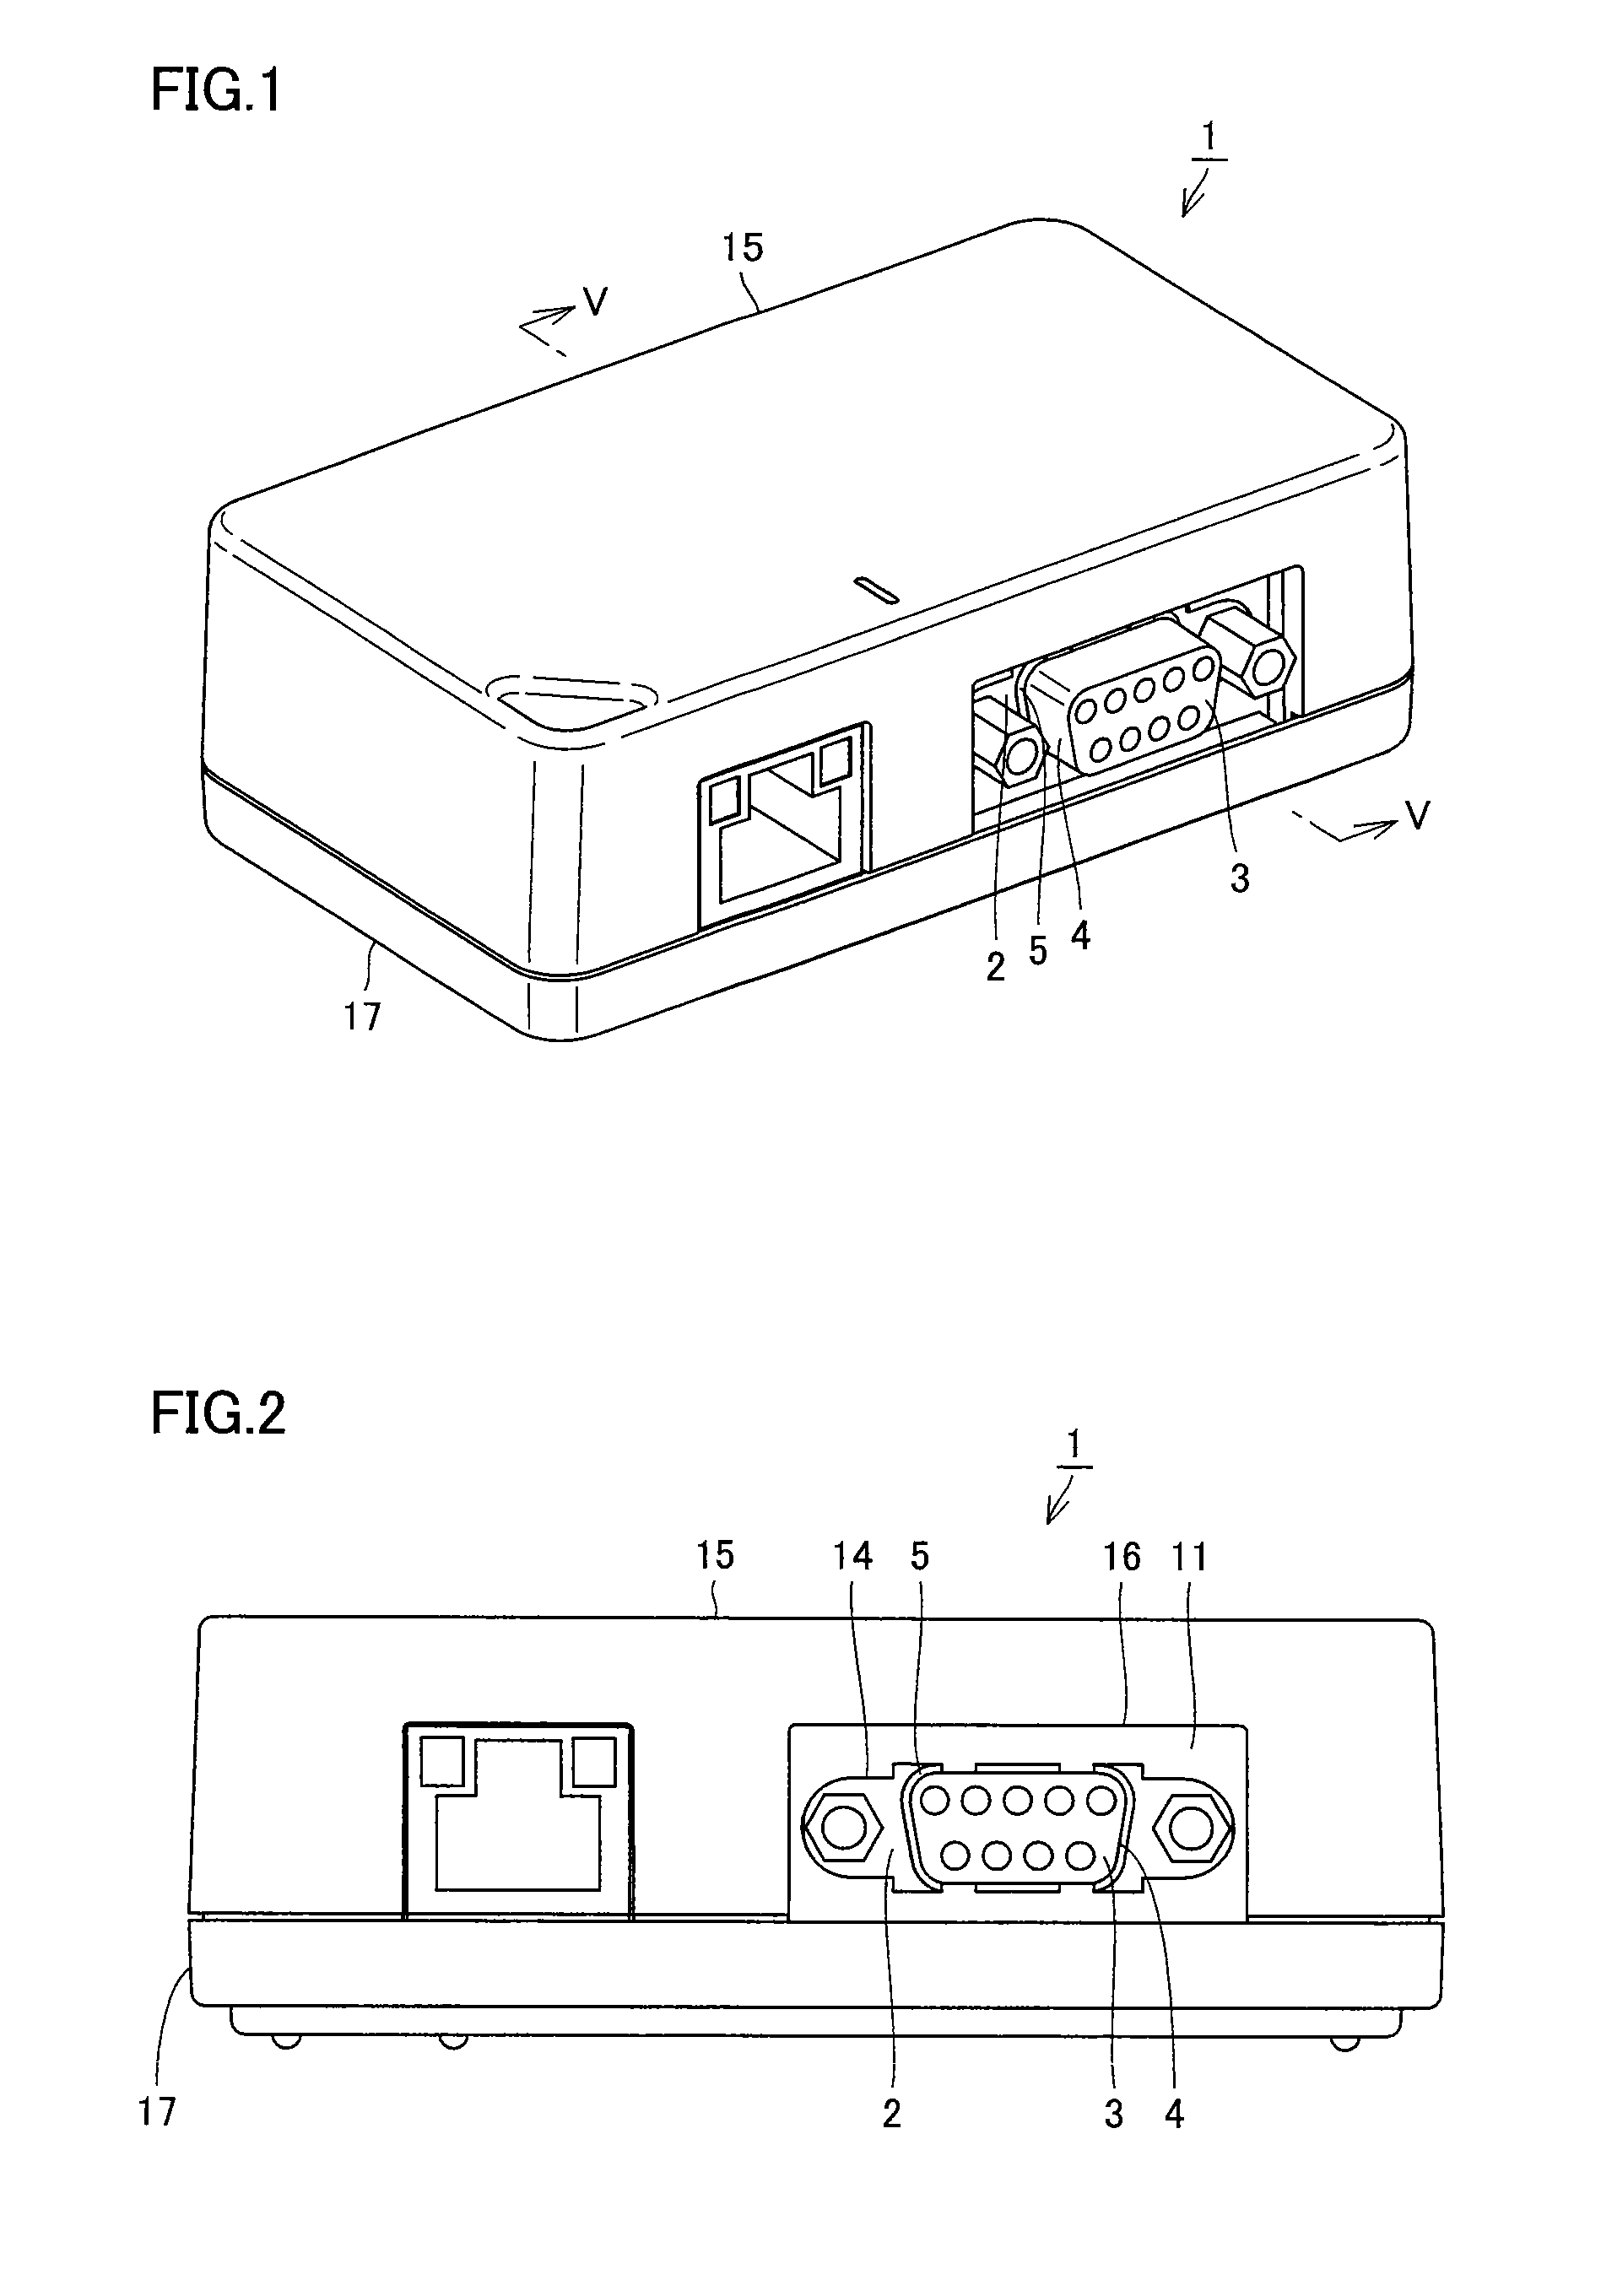 Electromagnetic shield structure of electronics housing